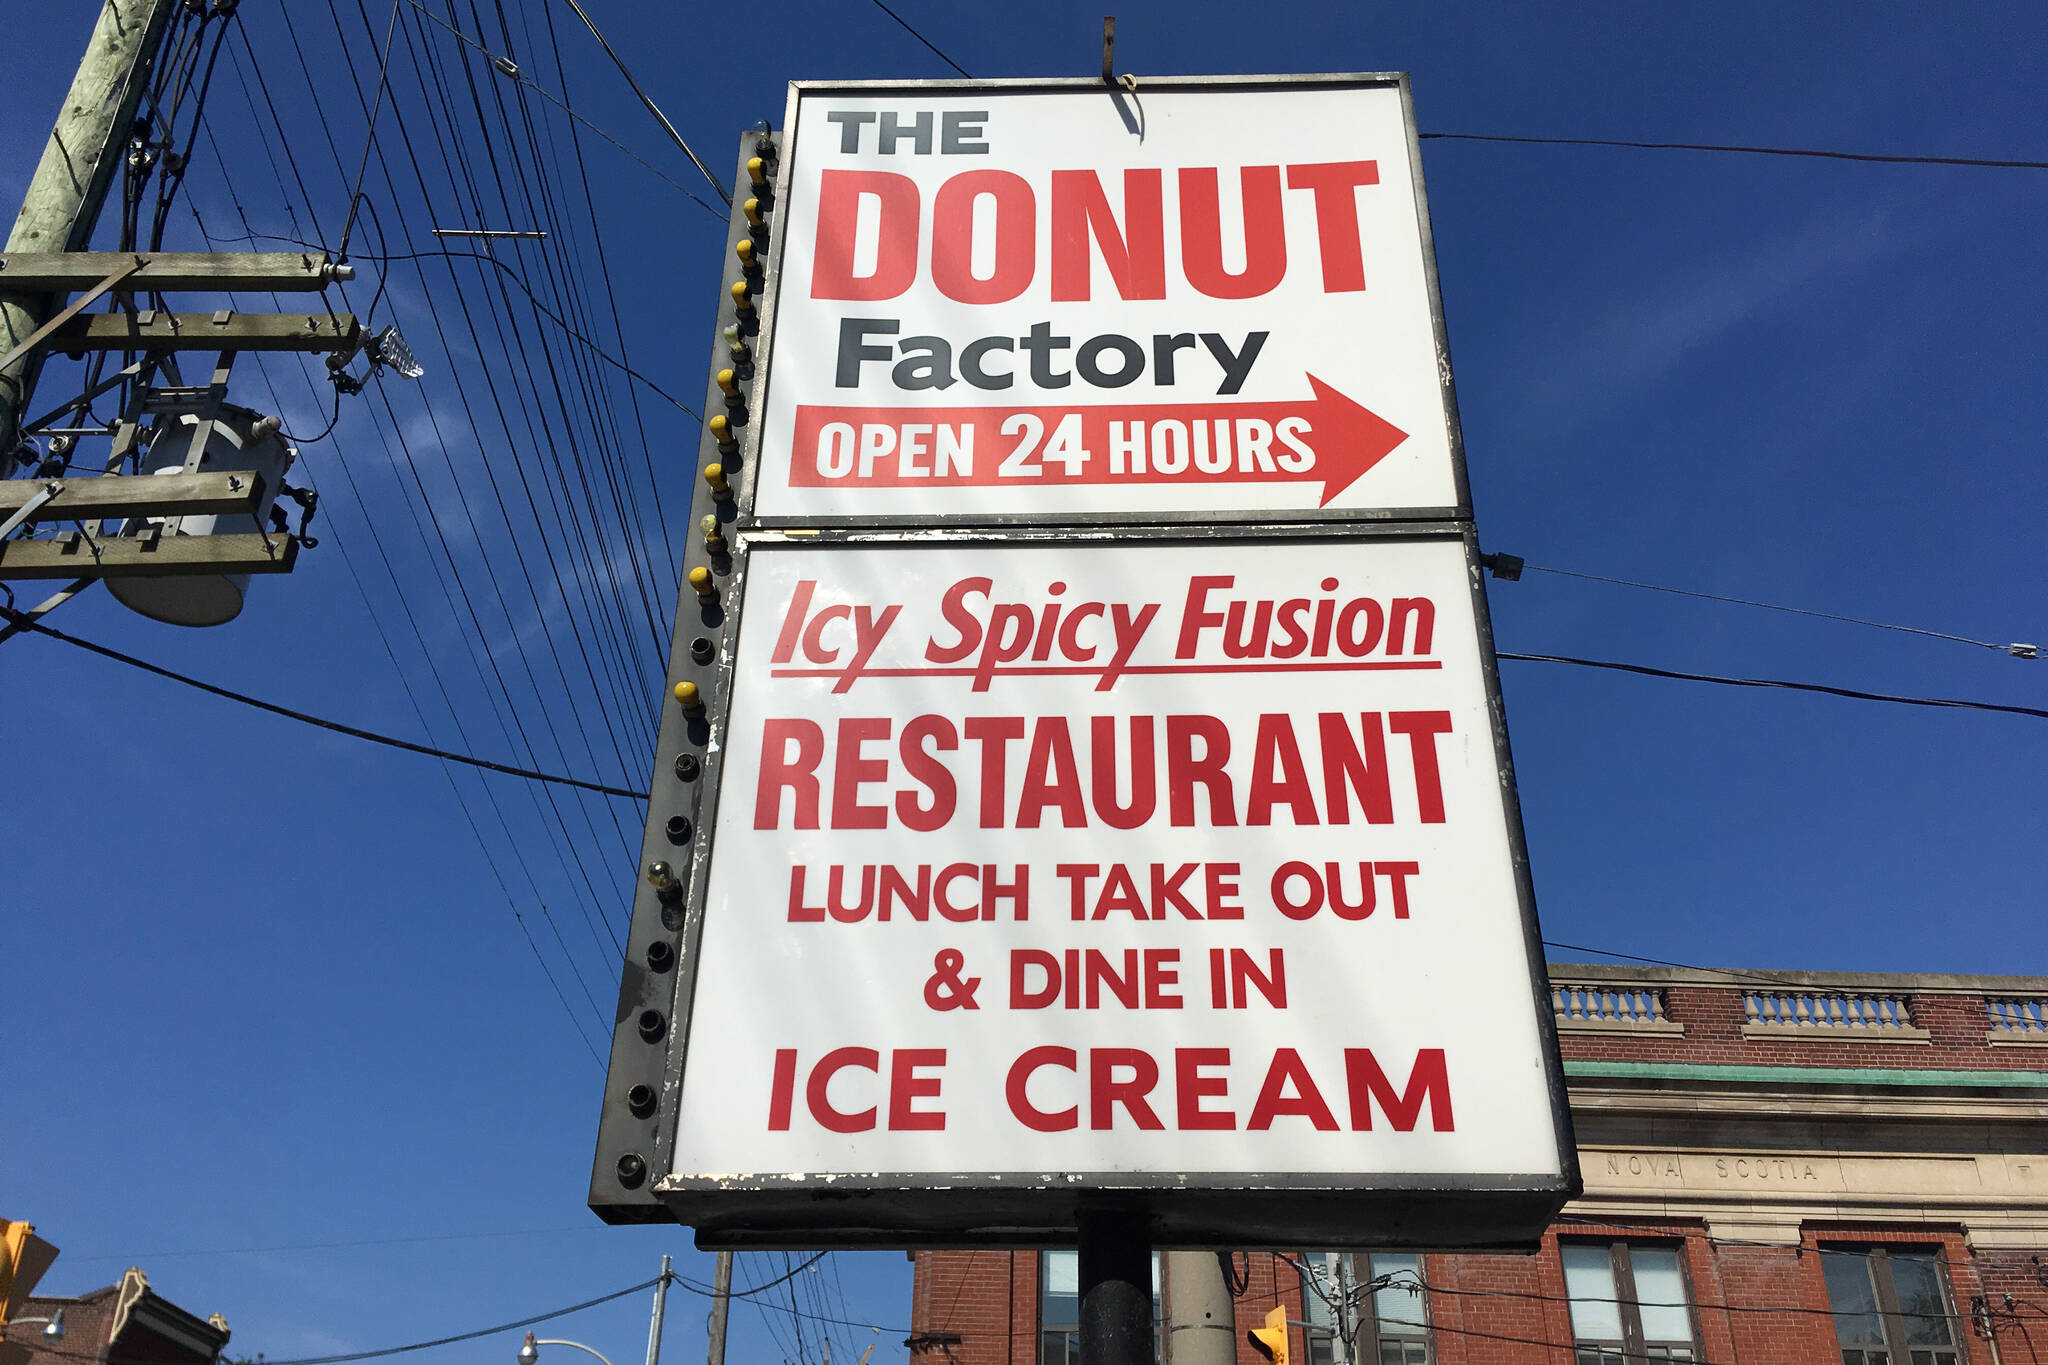 icy spicy fusion closed toronto